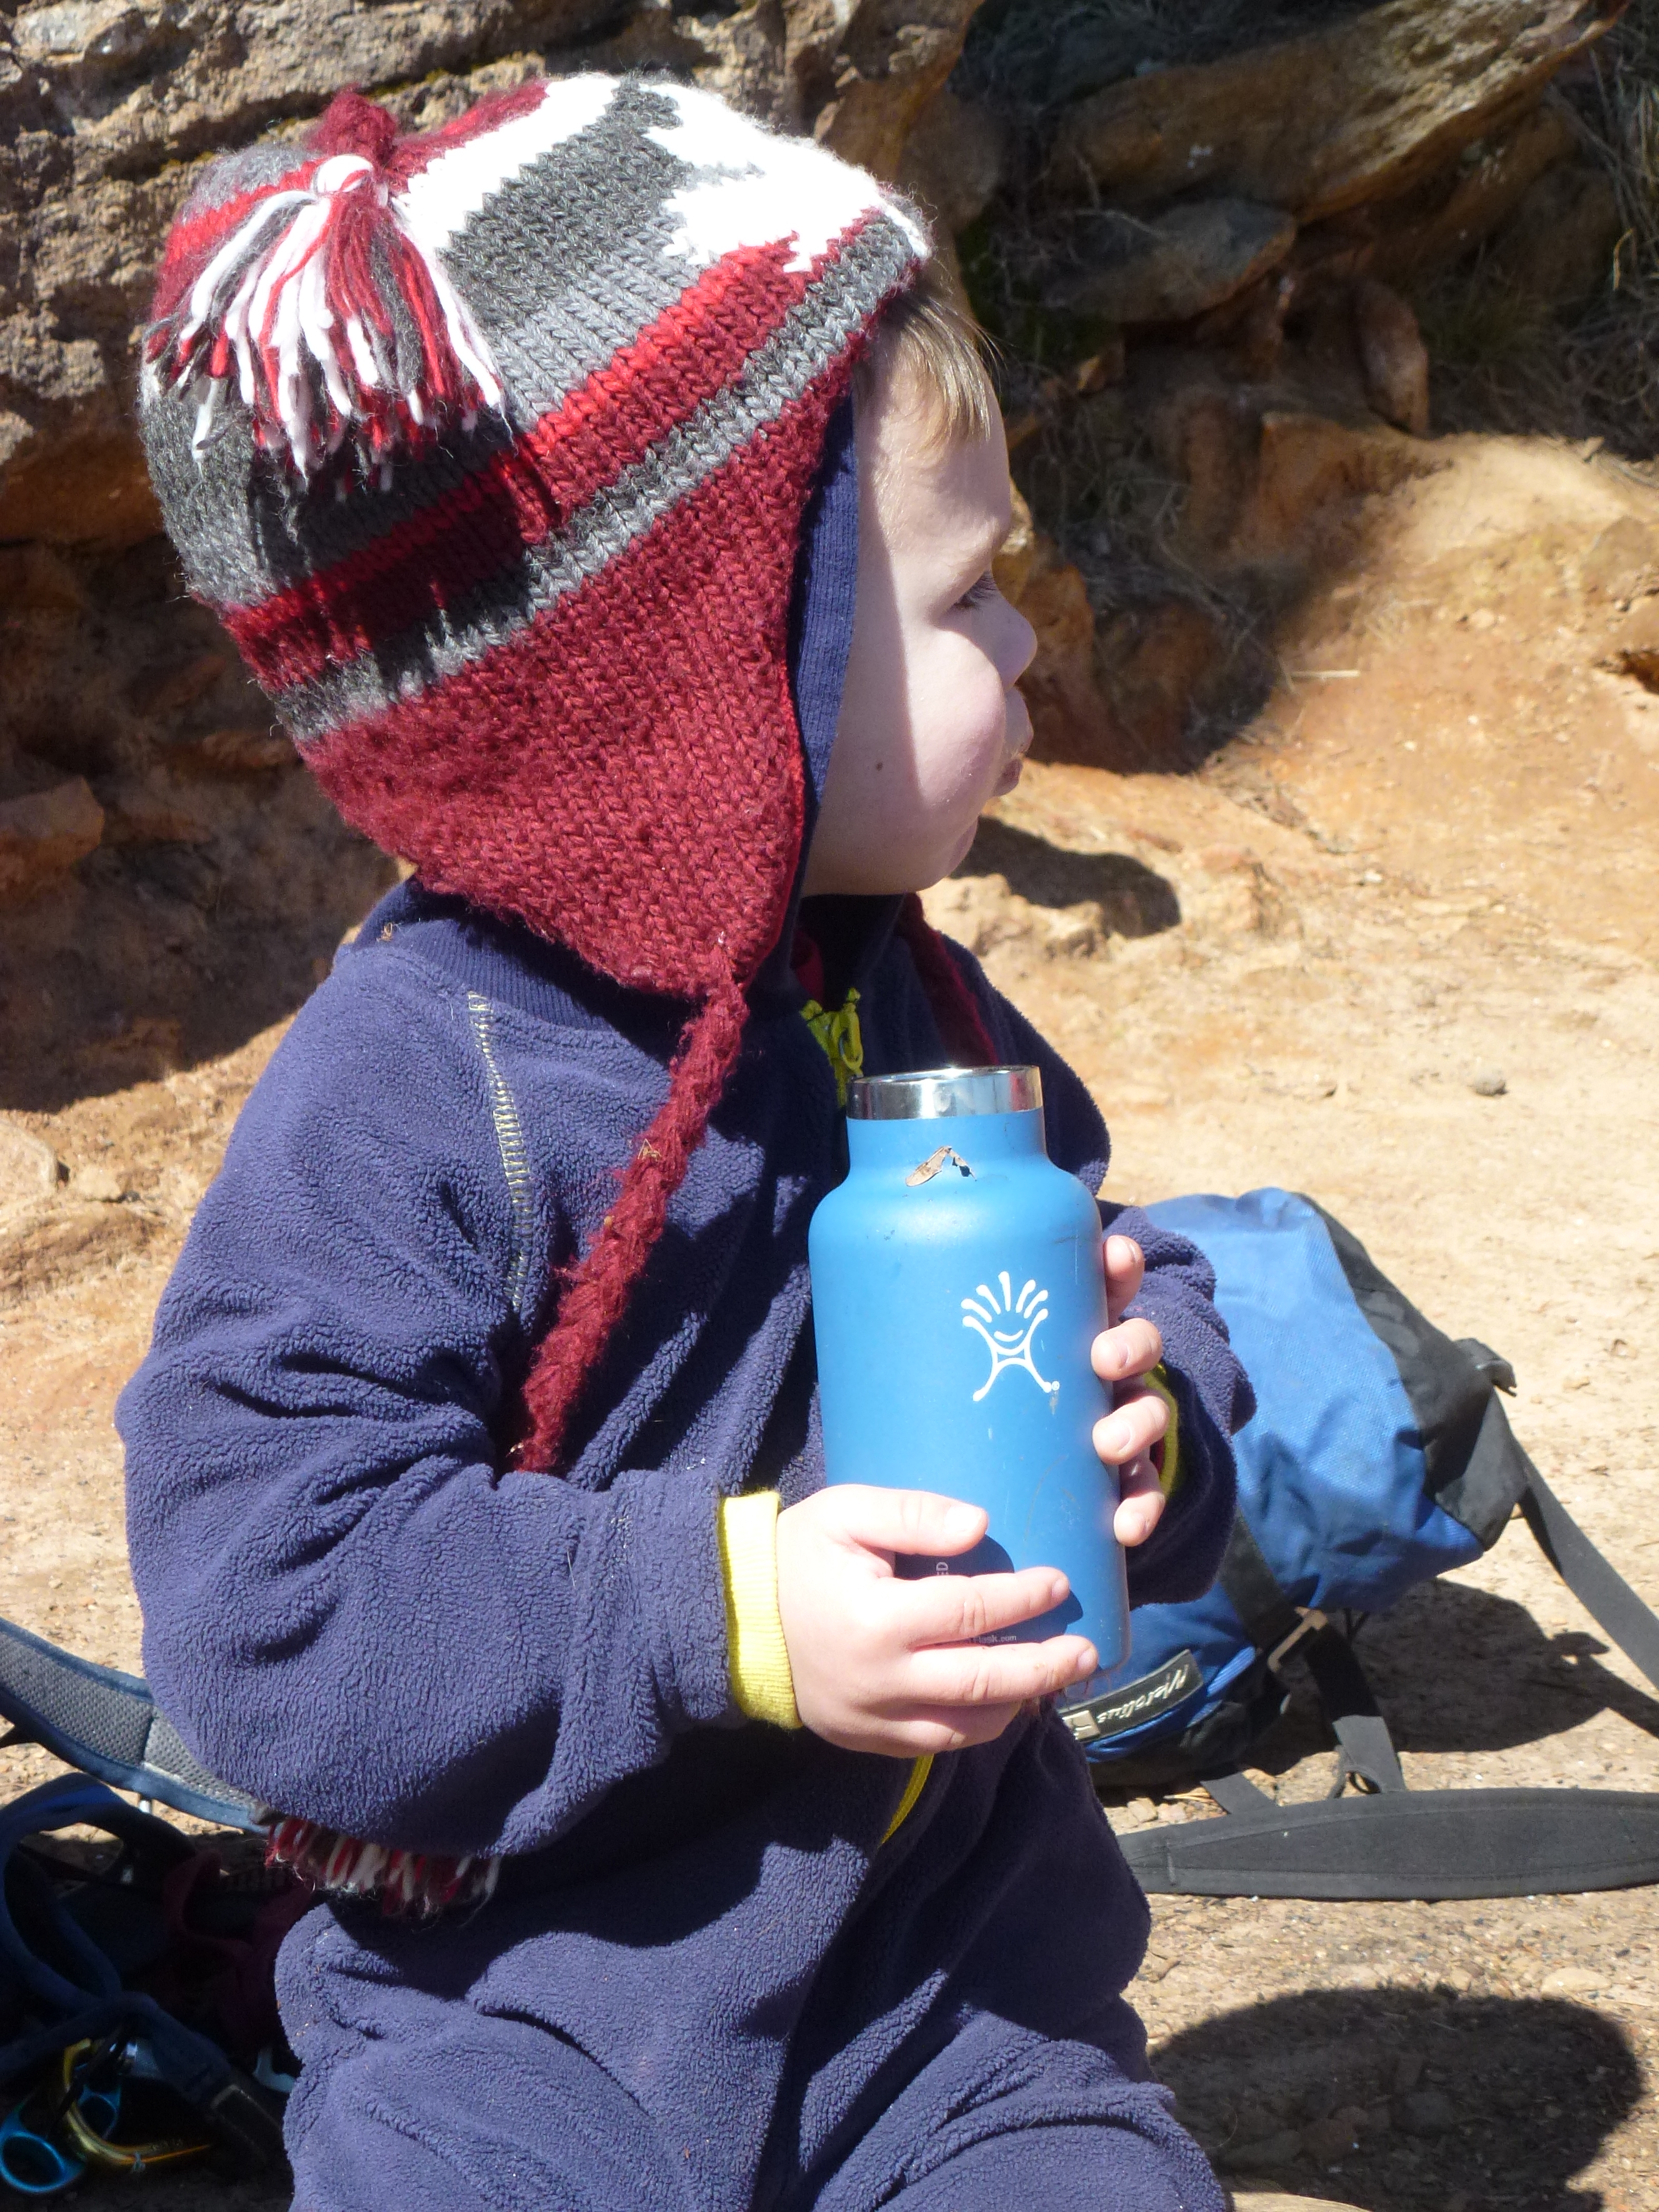 Review: Hydro Flask Insulated Food Flask - Climbing